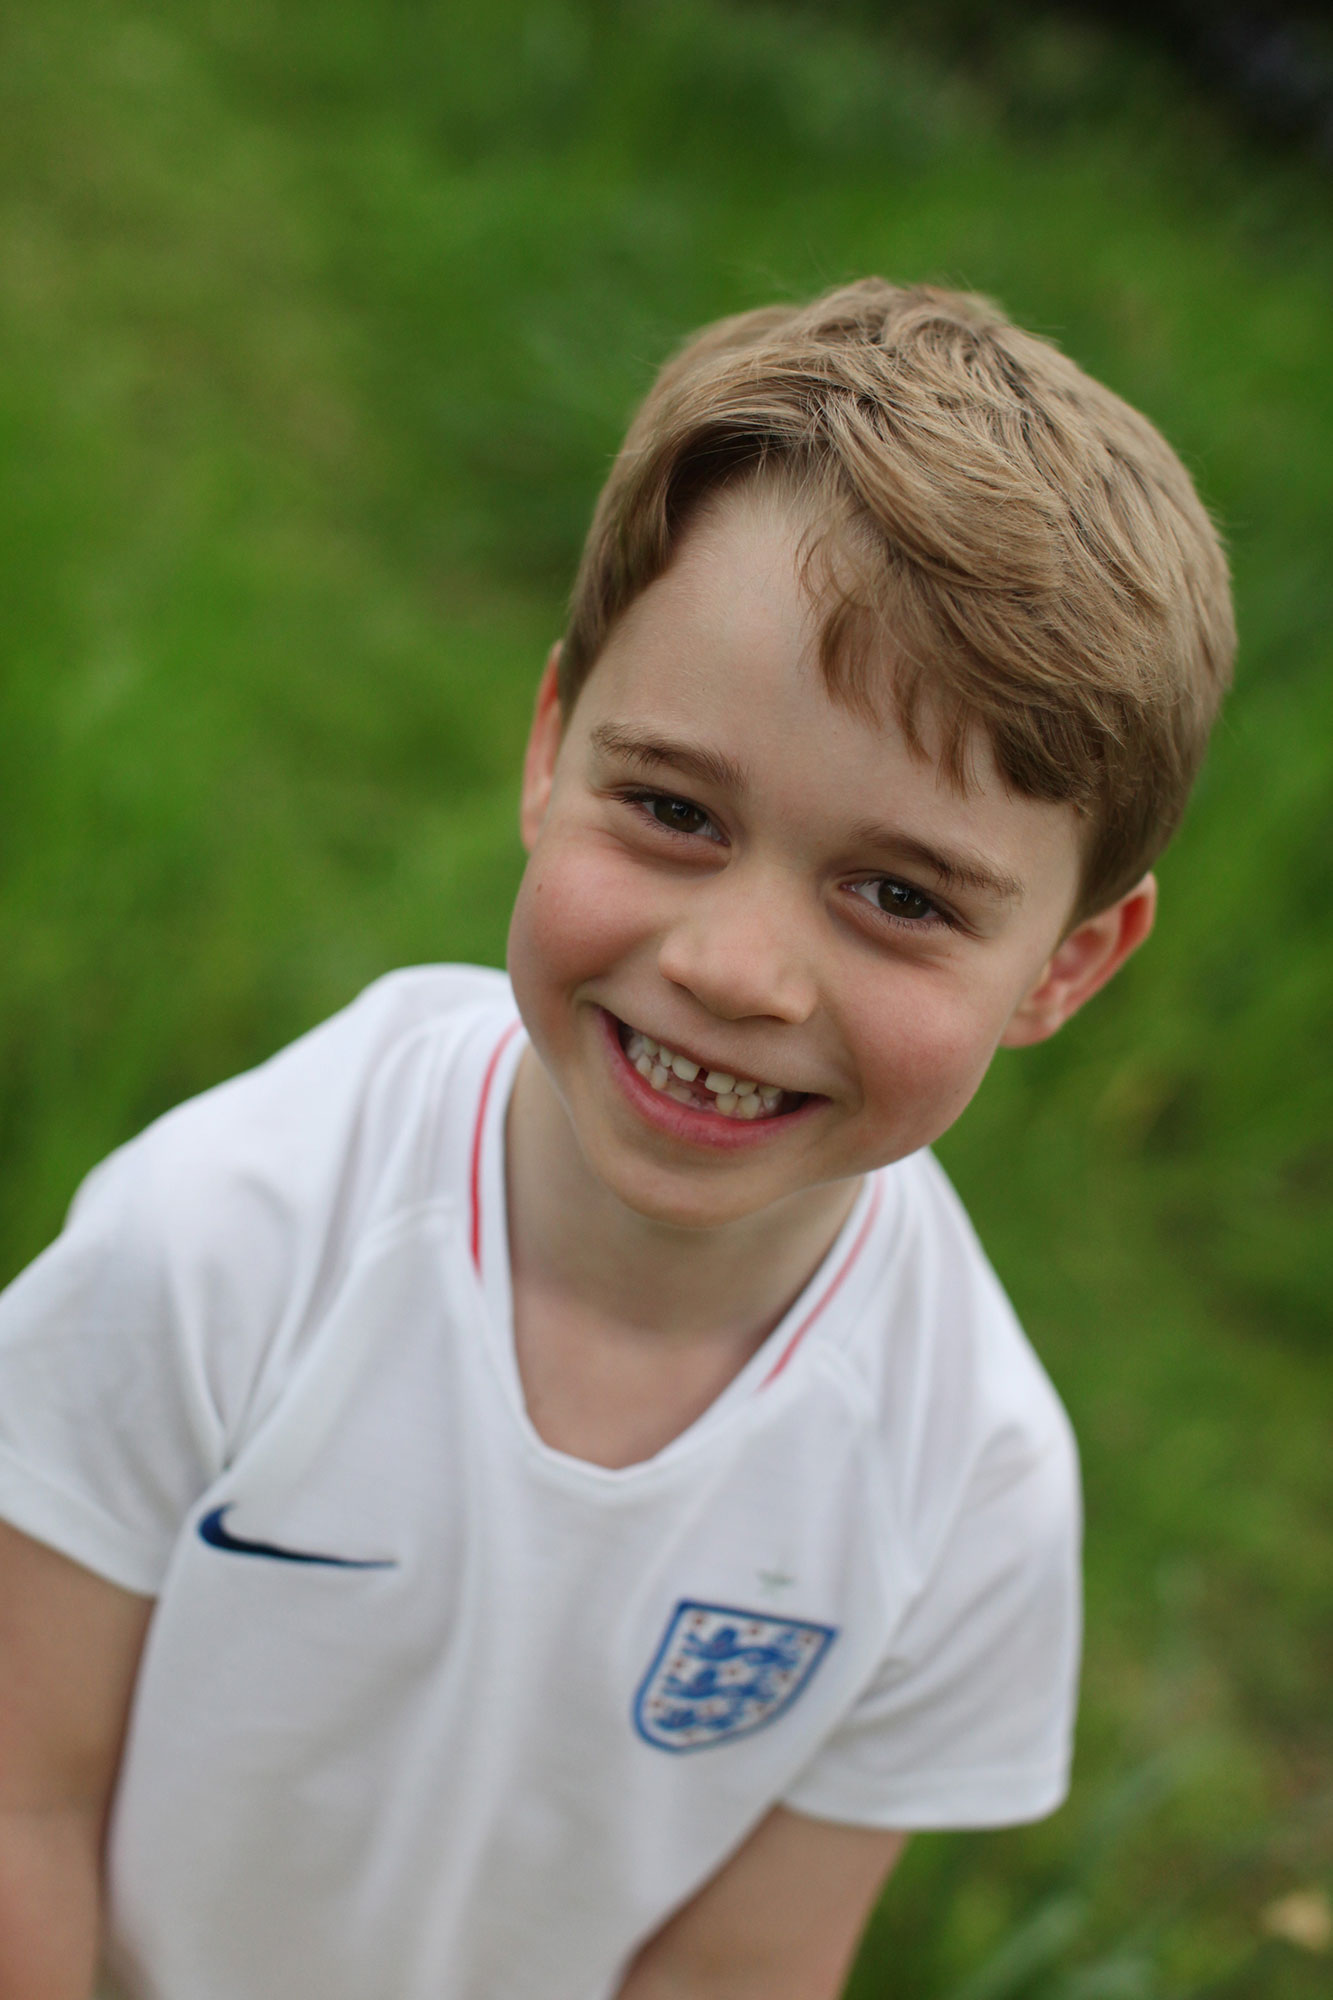 Prince George Flashes His Missing Tooth in Super Casual New Birthday Portraits: See All 3!